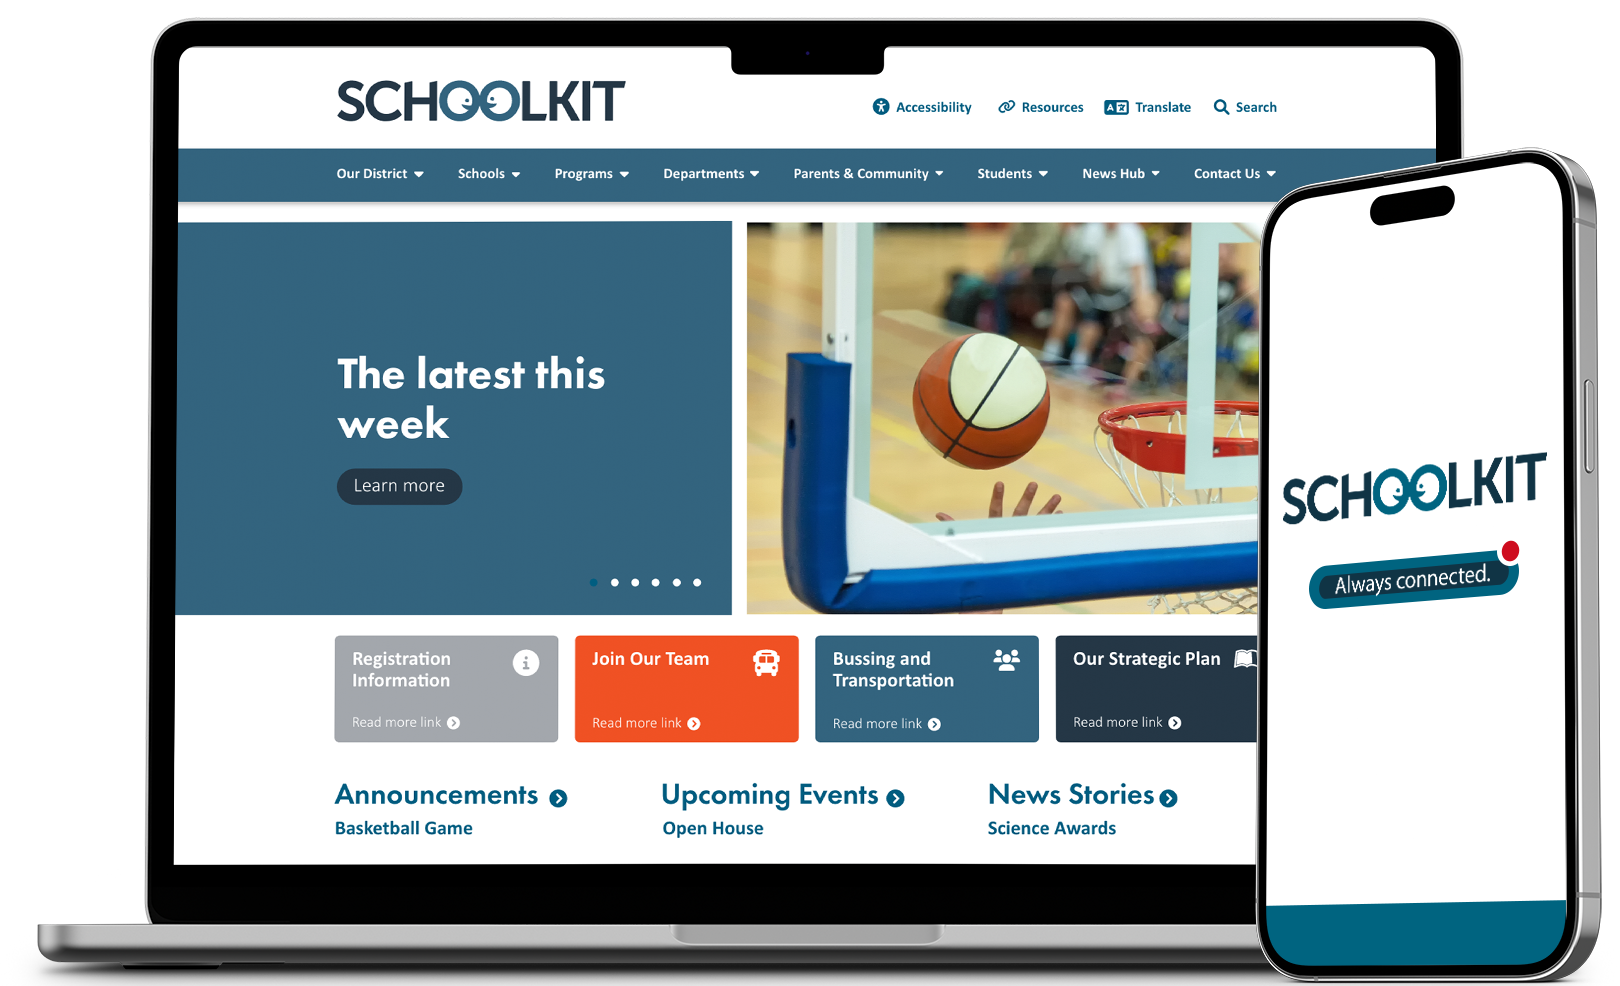 A laptop and mobile screen showing the schoolkit website